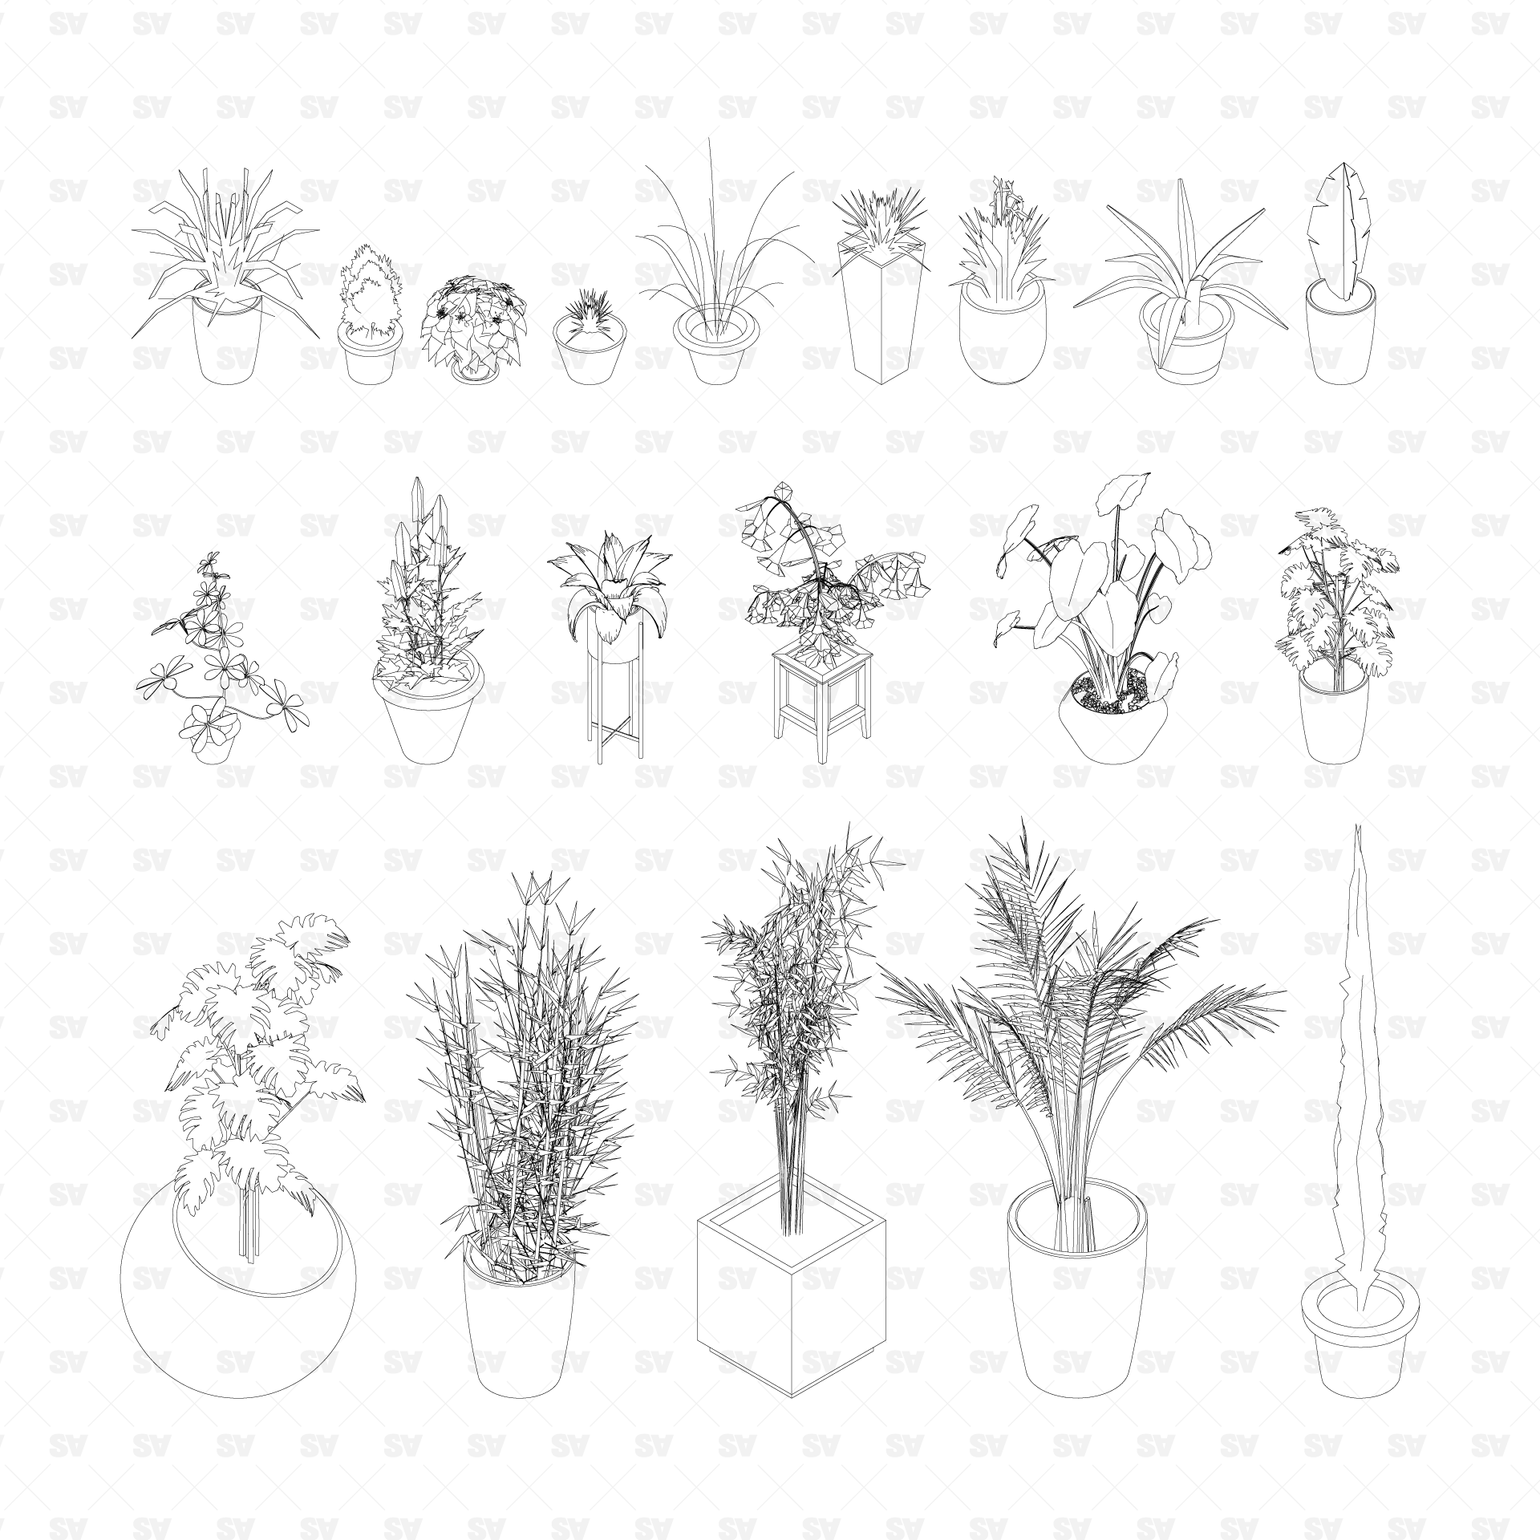 Isometric Potted Plants (20 Figures) | CAD AI PNG DWG | Architecture ...